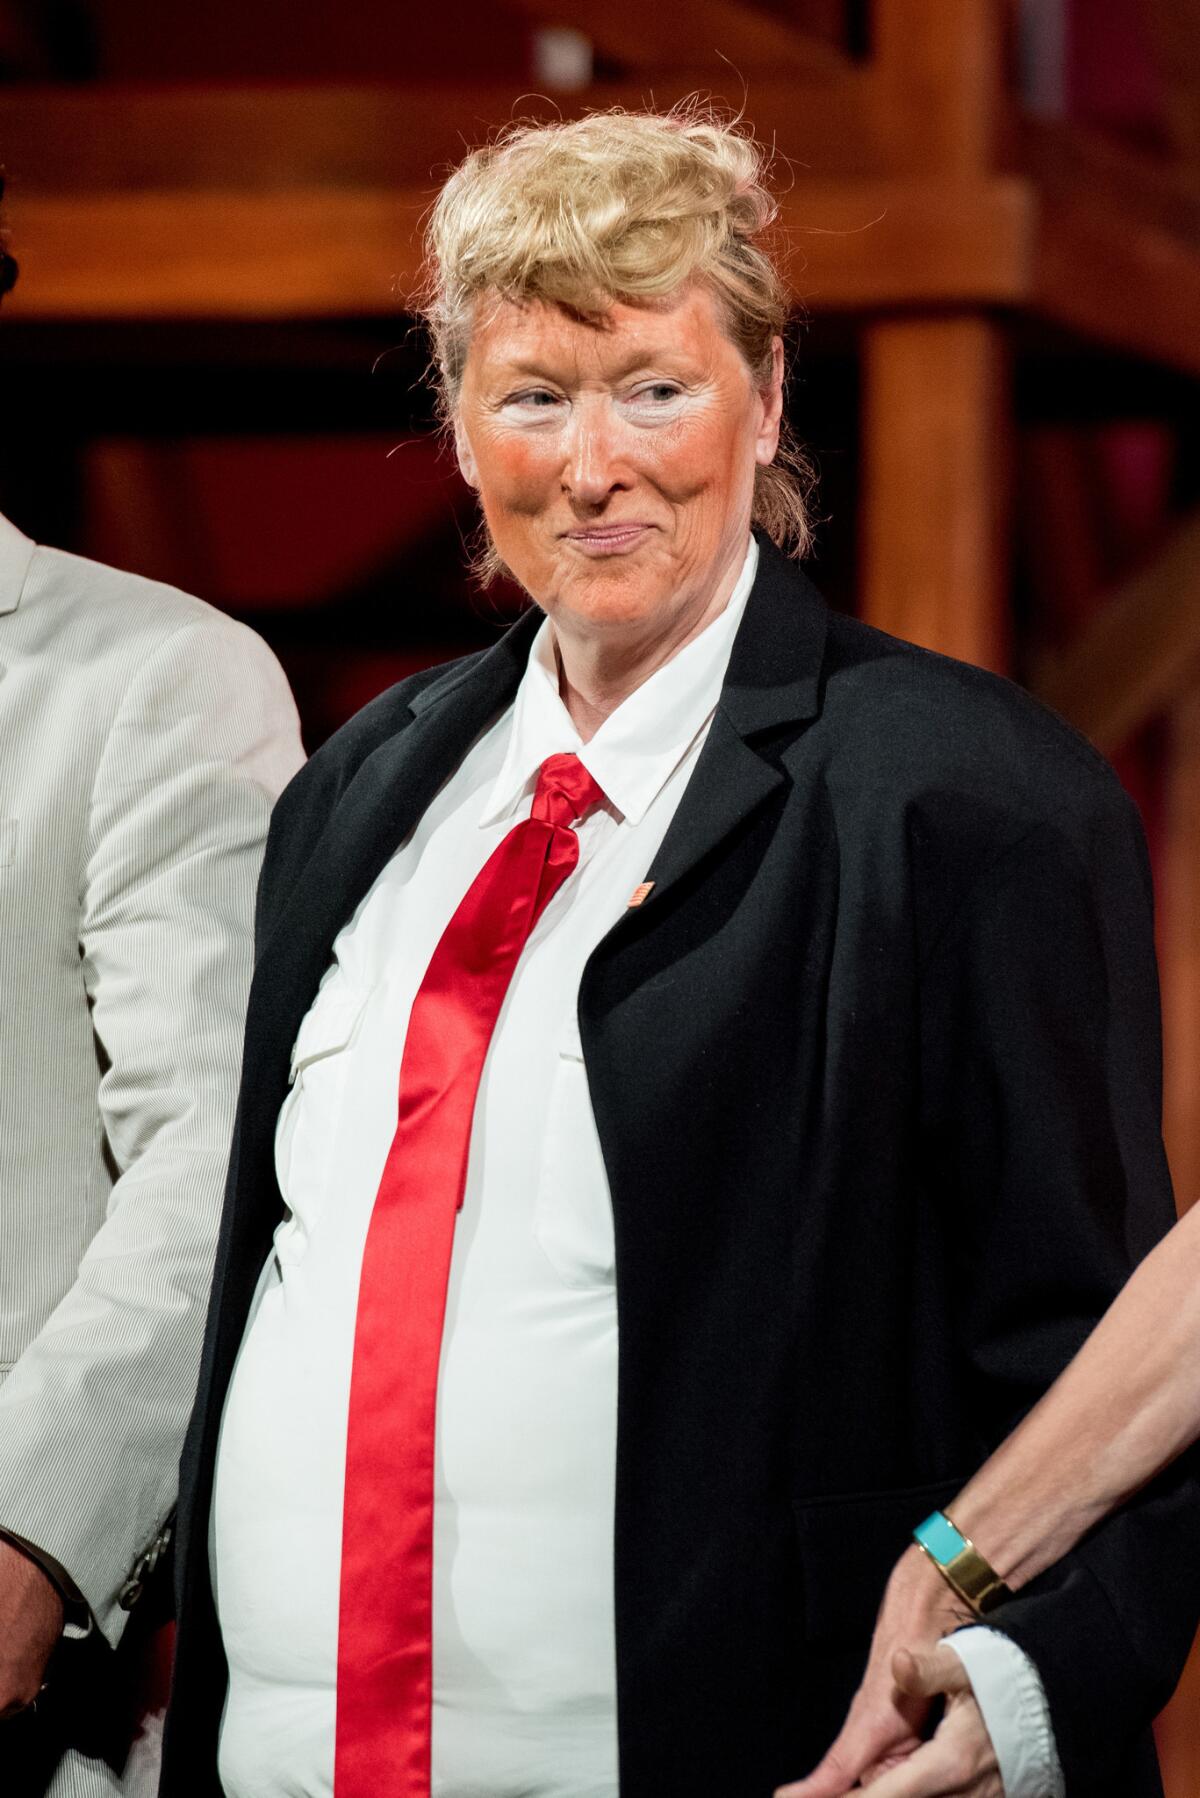 Meryl Streep dressed as Donald Trump on Monday for the annual Public Theater gala at the Delacorte Theater in New York.